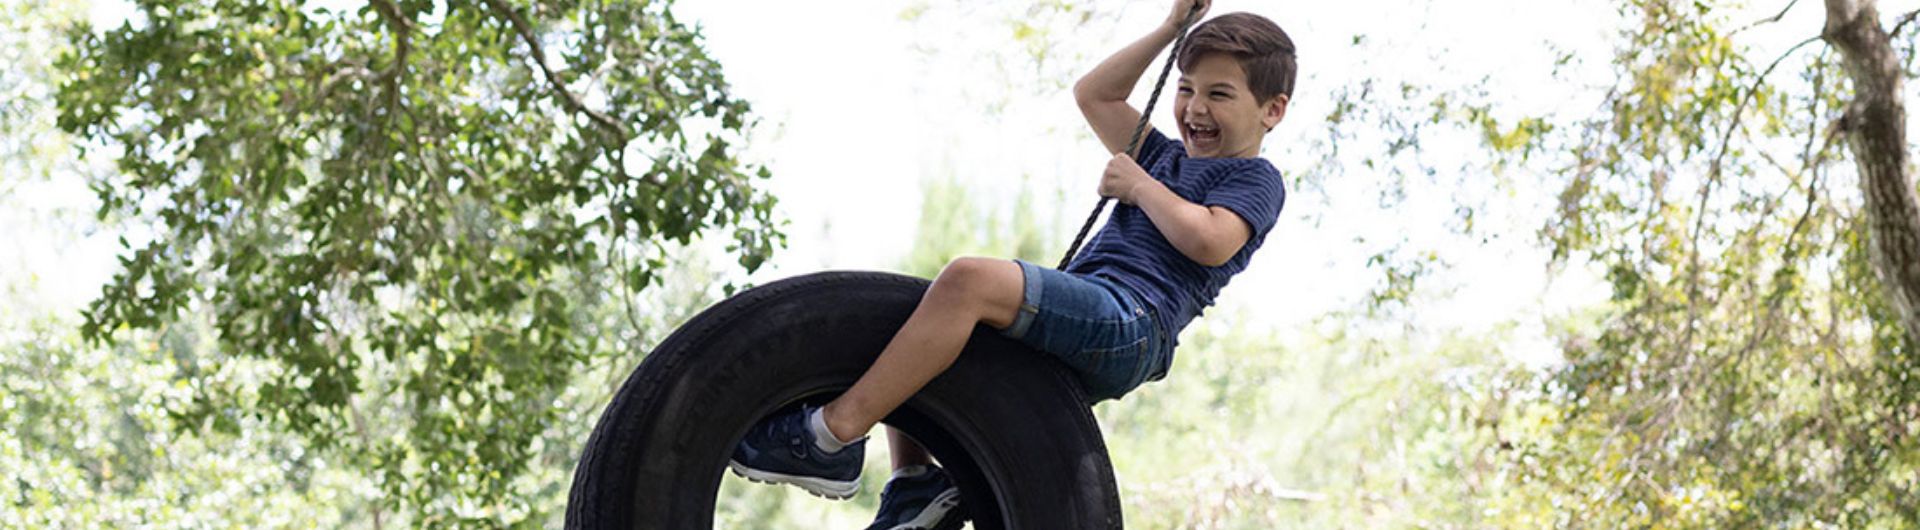 a child swinging on a tire swing